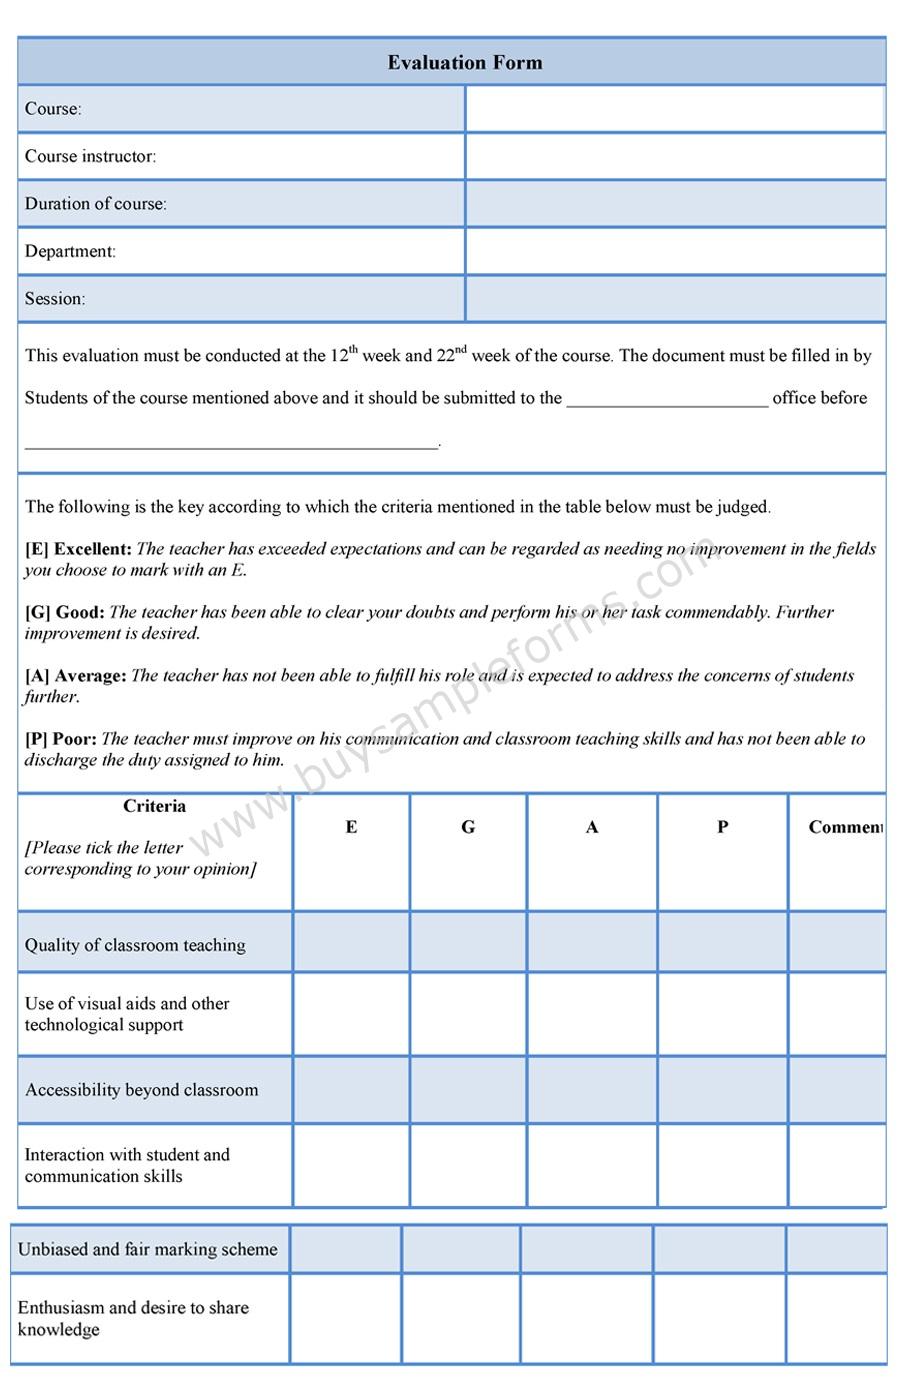 sample-evaluation-form-evaluation-word-template